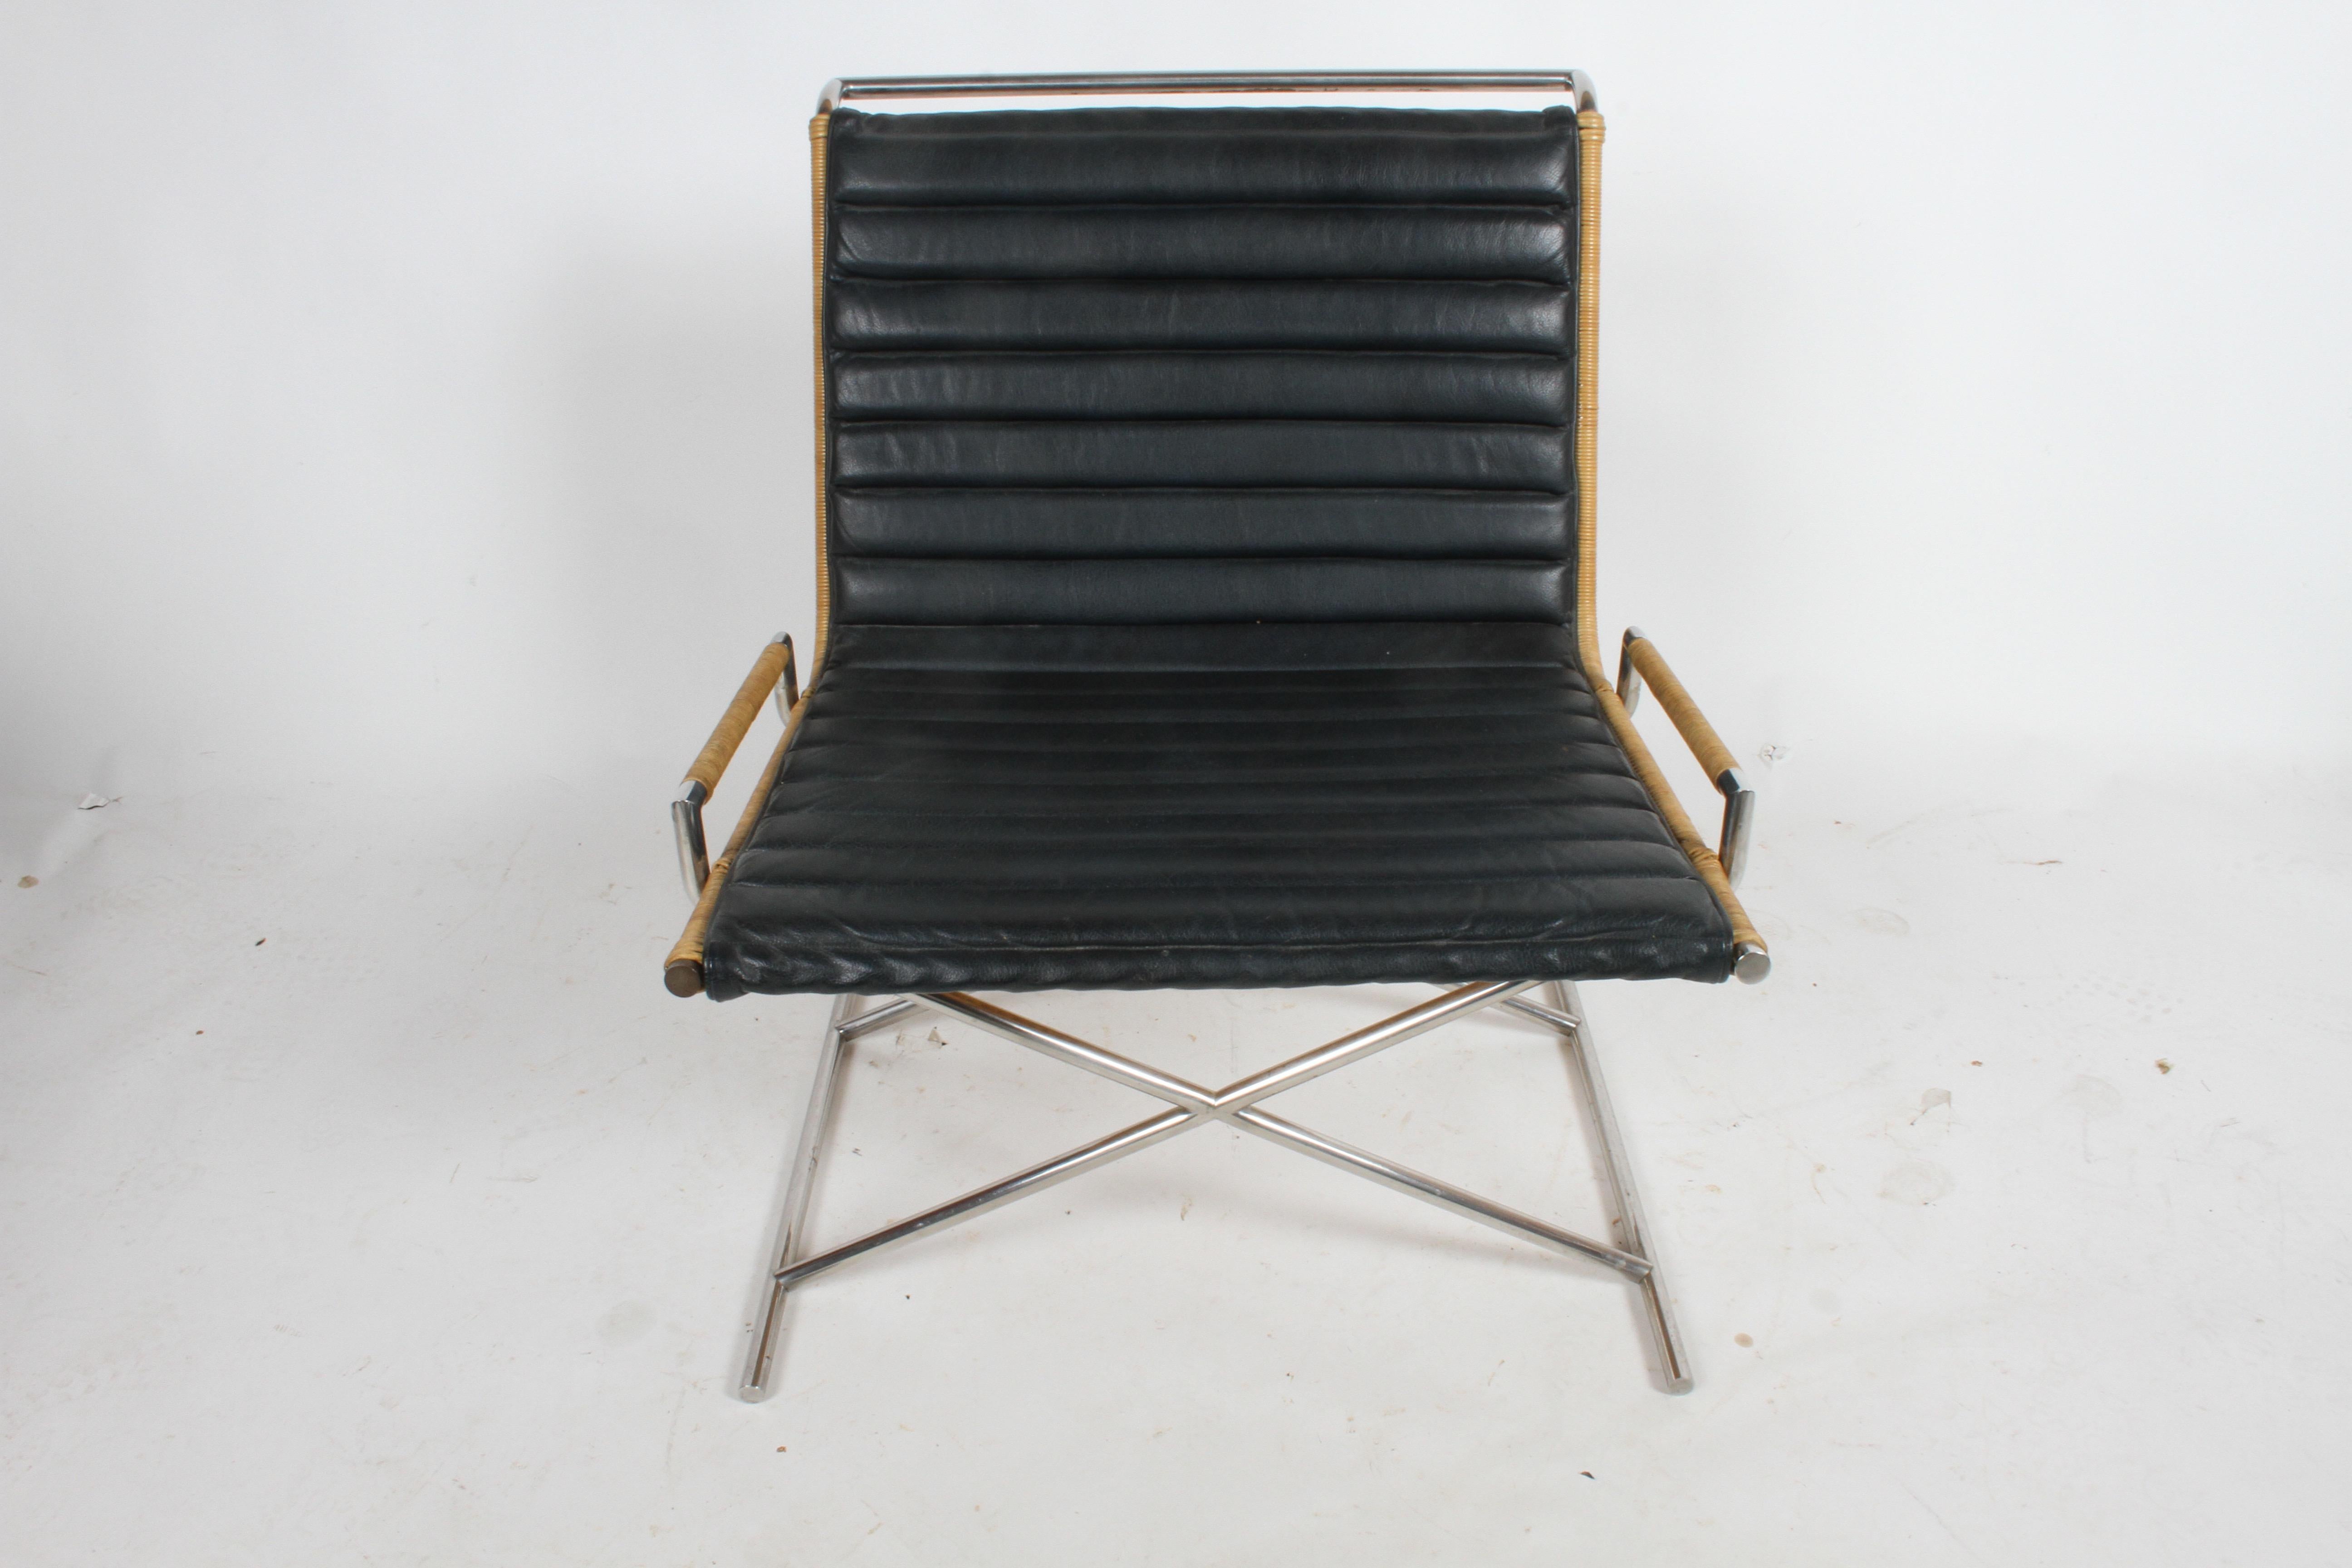 Striking all original Ward Bennett Sled chair with rattan, chrome frame and leather seat. Classic Bennett design with x form base. Minor wear to leather as to be expected, rattan is solid, tight and strong. Note: Front cap on left side front will be